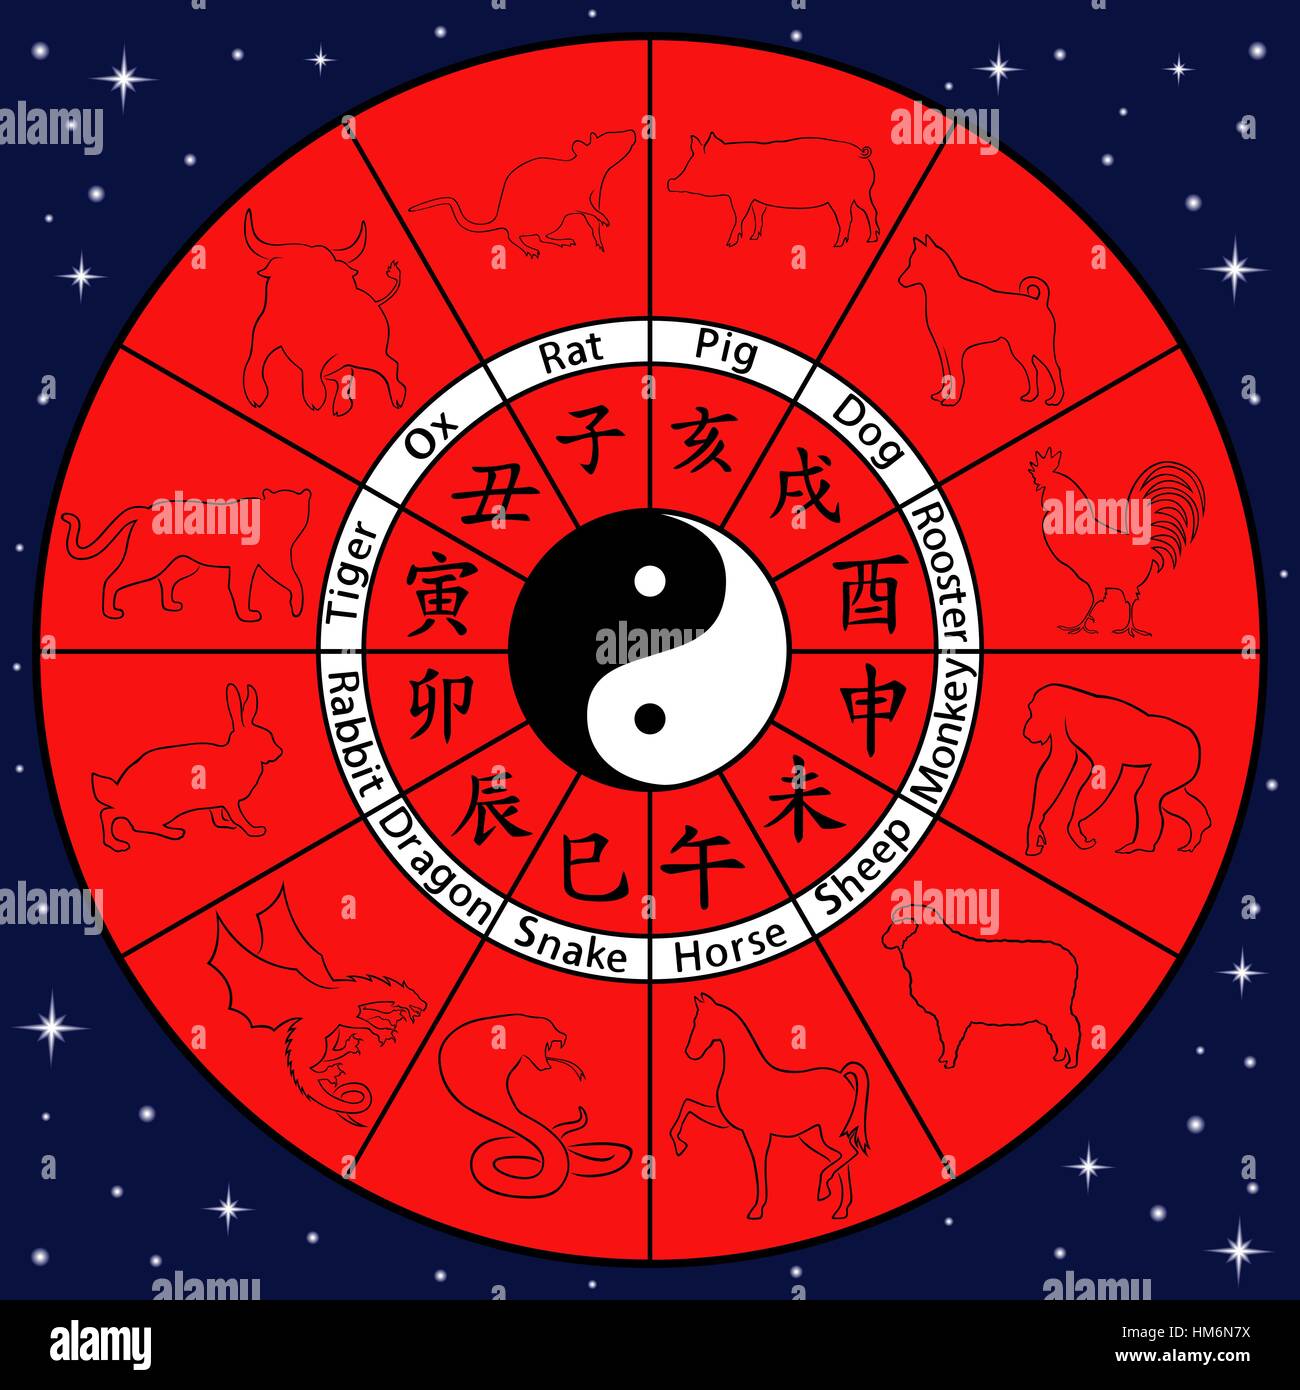 Chinese zodiac with animal symbols on the circle and Yin and Yang in the centre, vector illustration mainly in blue and red colors Stock Vector